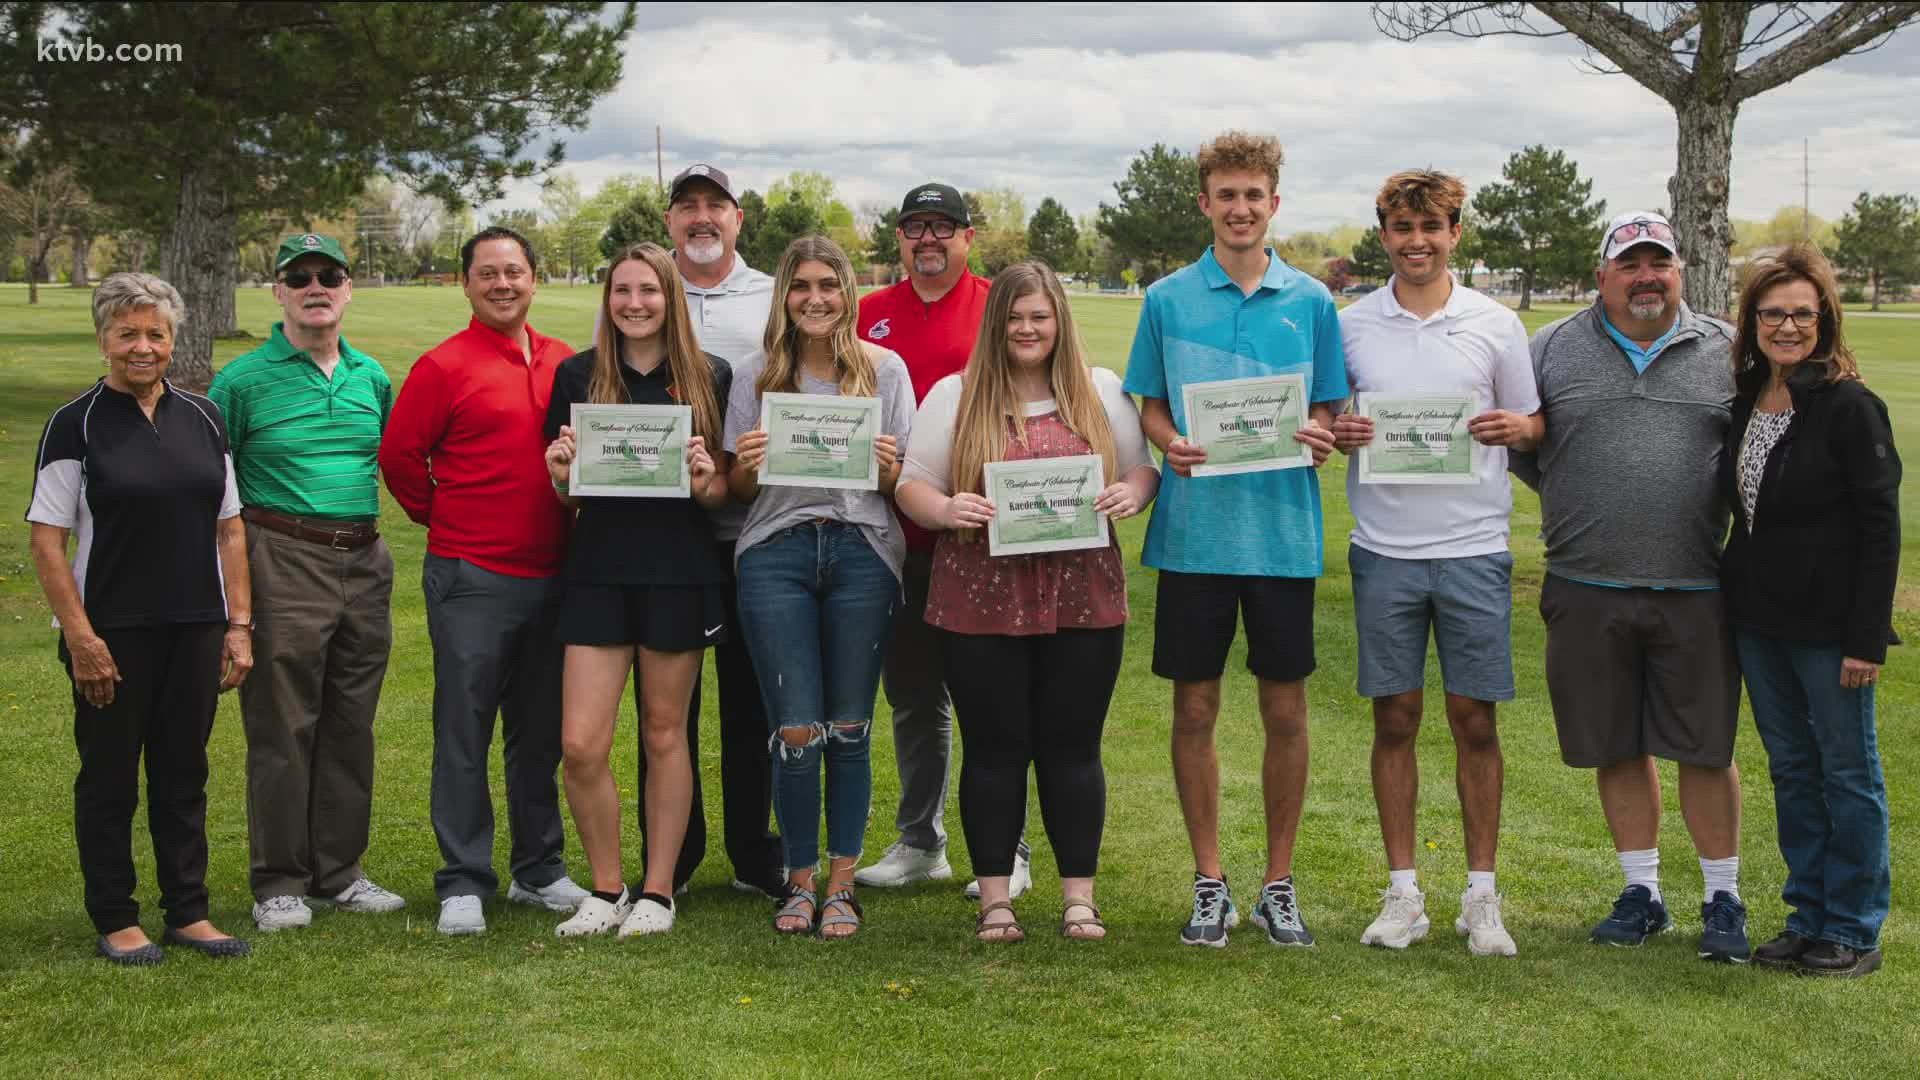 In 20 years of the Mayor's Golf Tournament, more than $215,000 has been raised for scholarships and youth programs in Nampa.